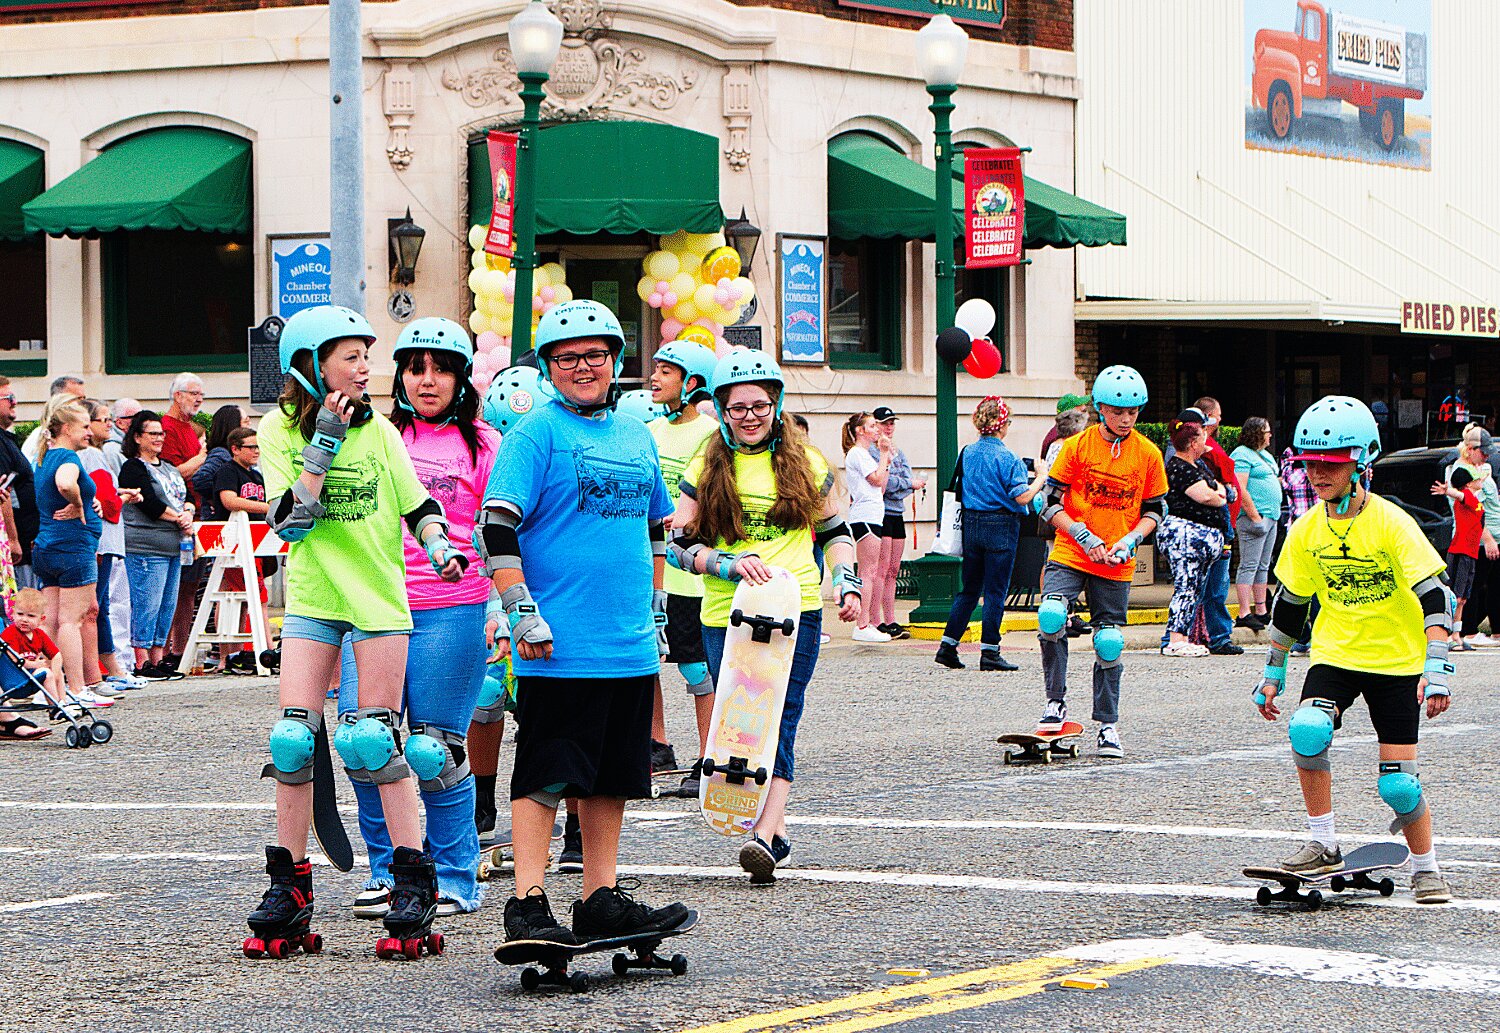 Members of Mineola skate club The Grind show of their skills. [see so many more sesquicentennial spring fling photos]